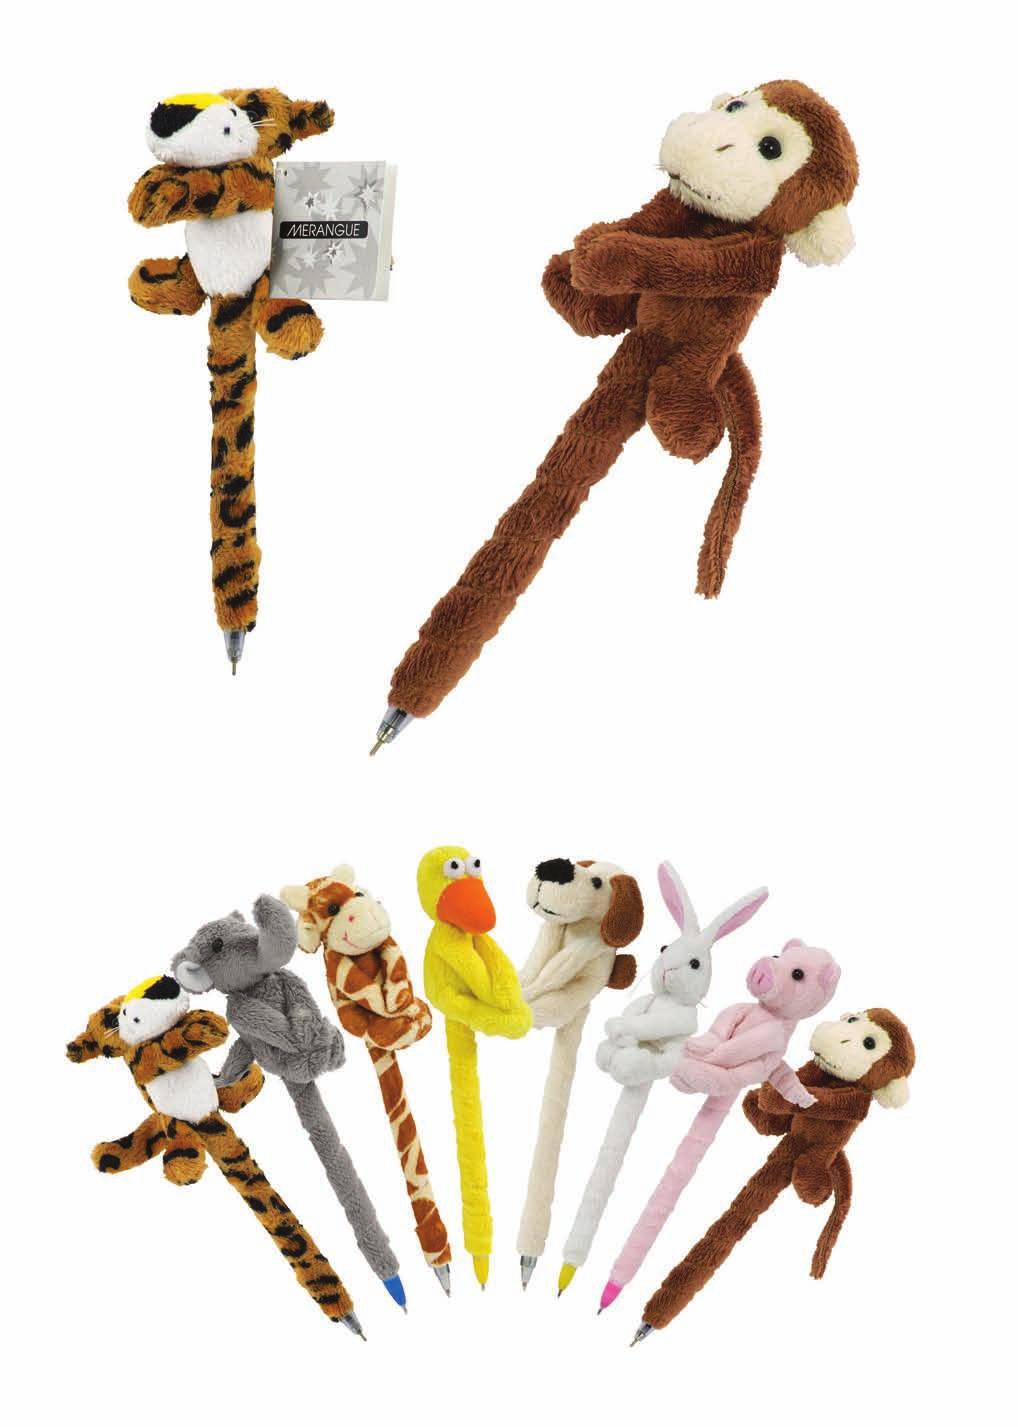 PLUSH RITER 38Q1-8010-00-000 NOVELTY Plush Riter Pens - Gel-based ink dries instantly - Non-toxic